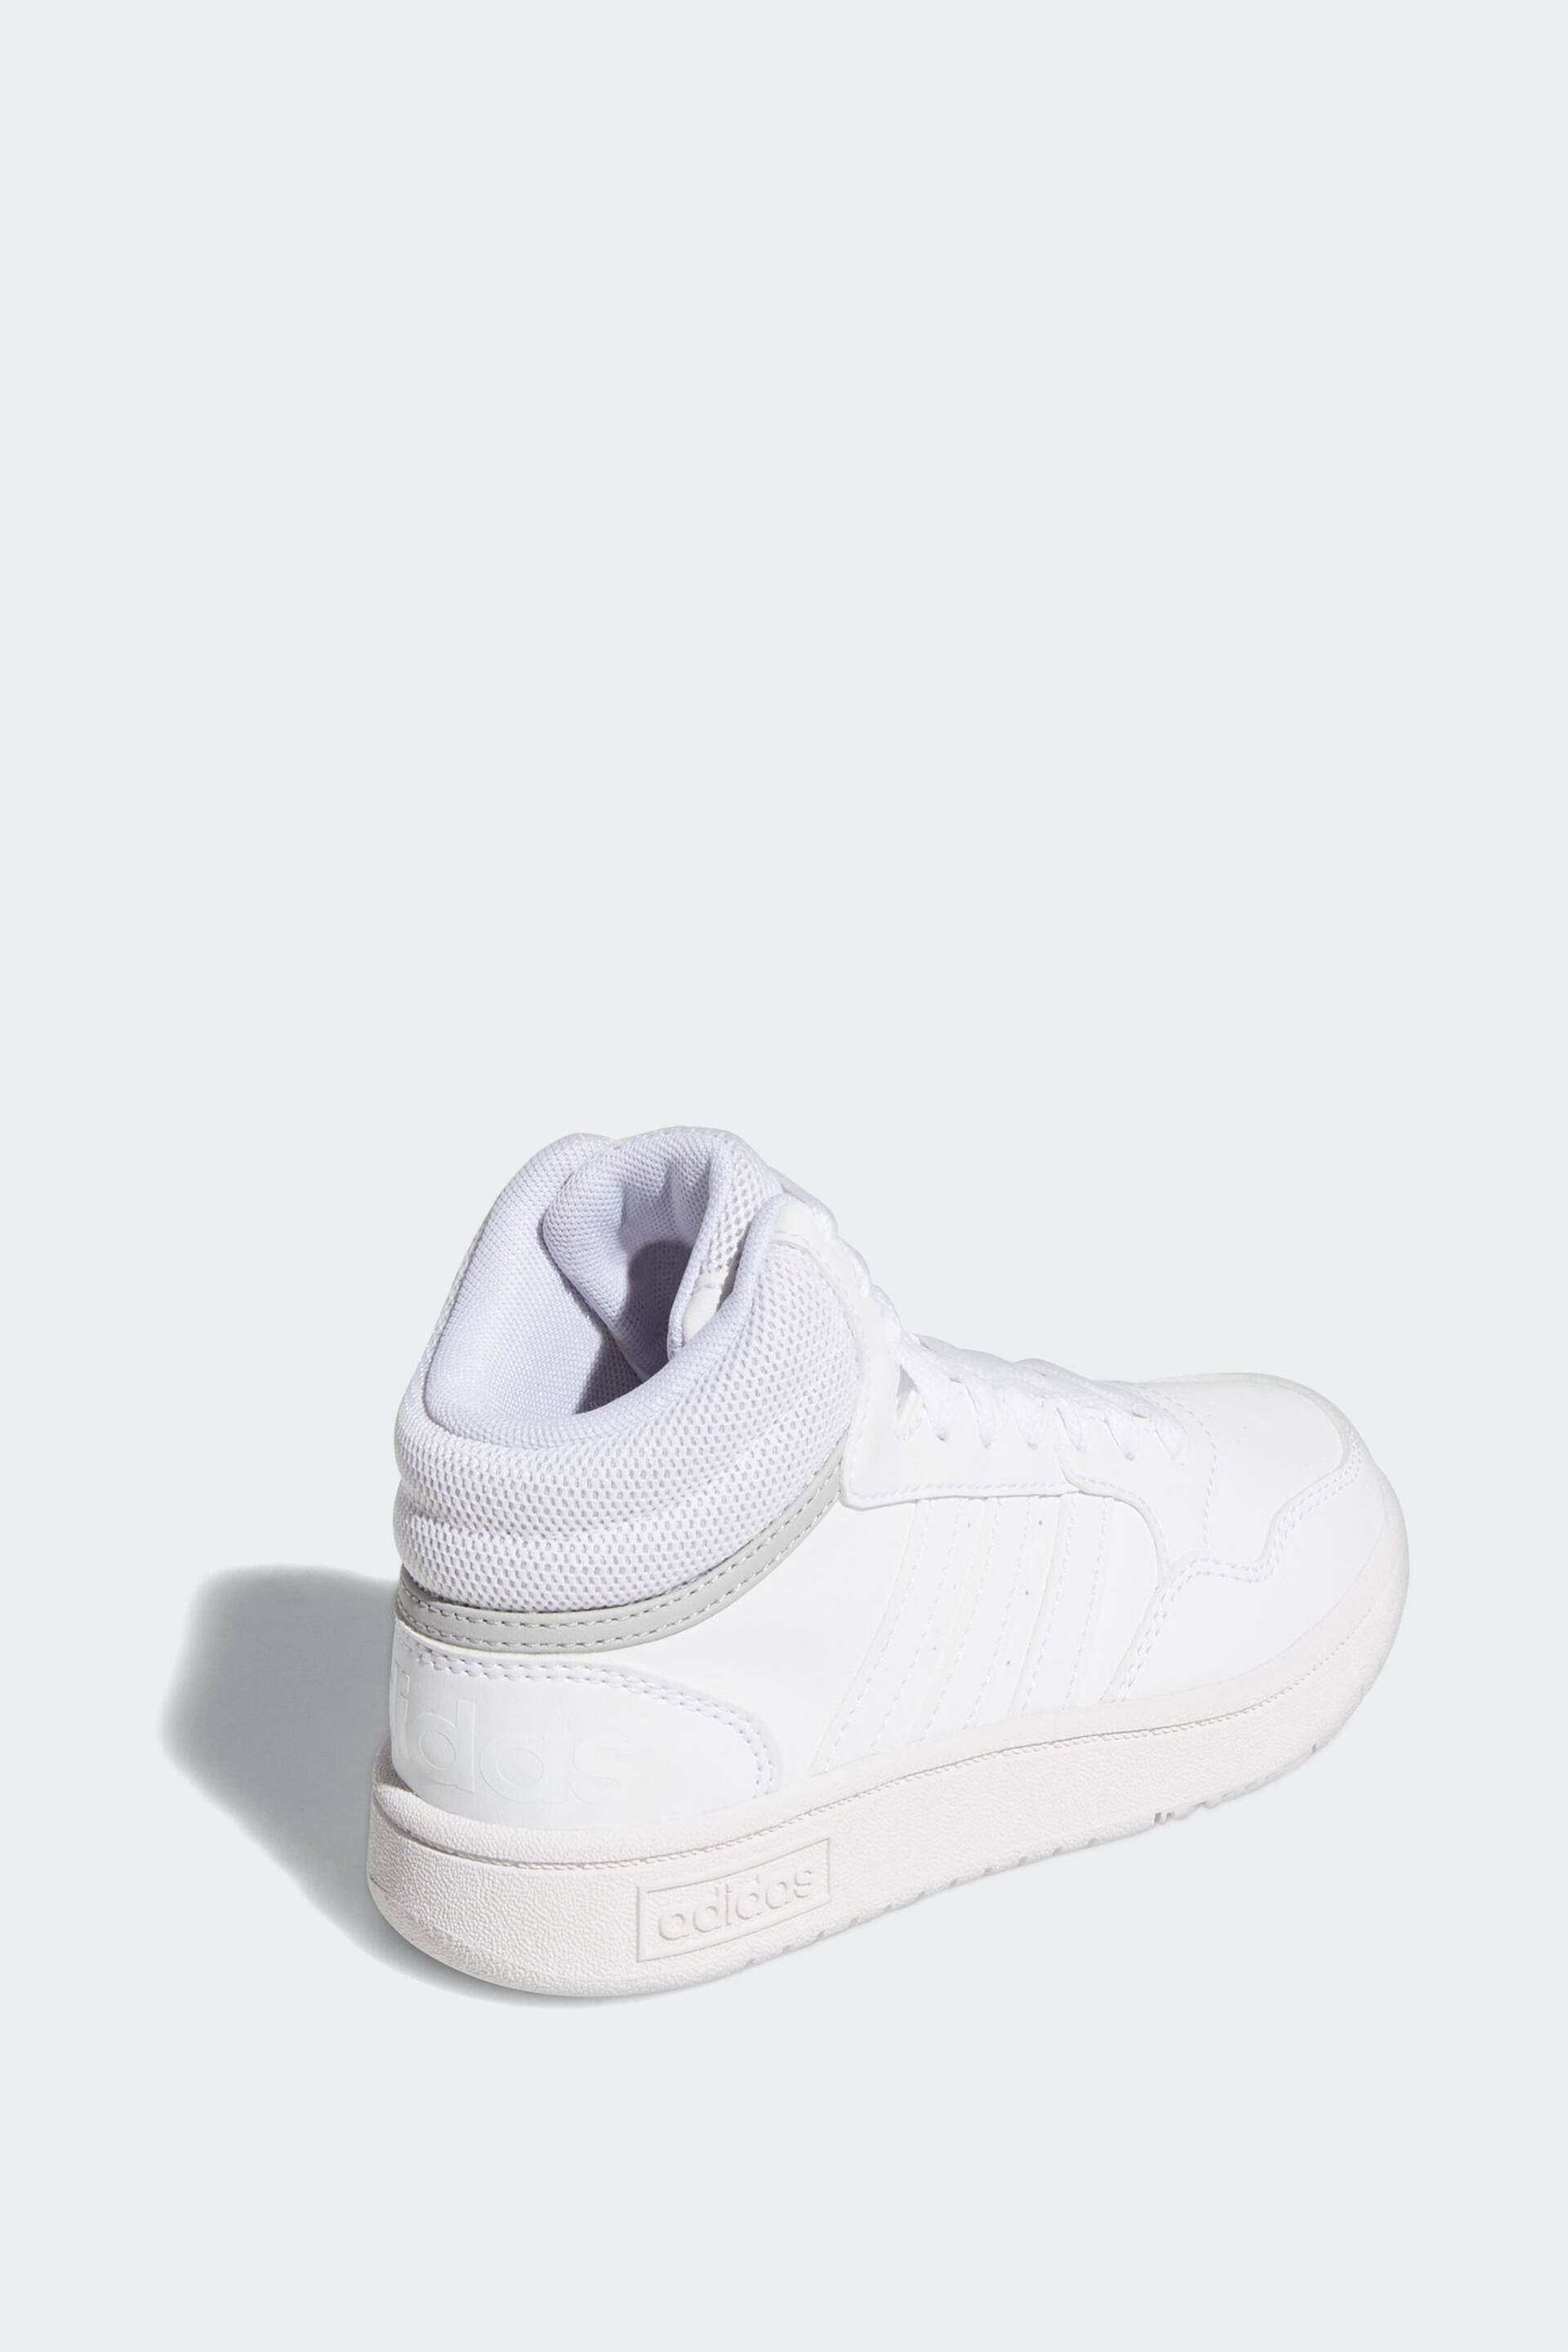 adidas White Hoops Mid Shoes - Image 5 of 9